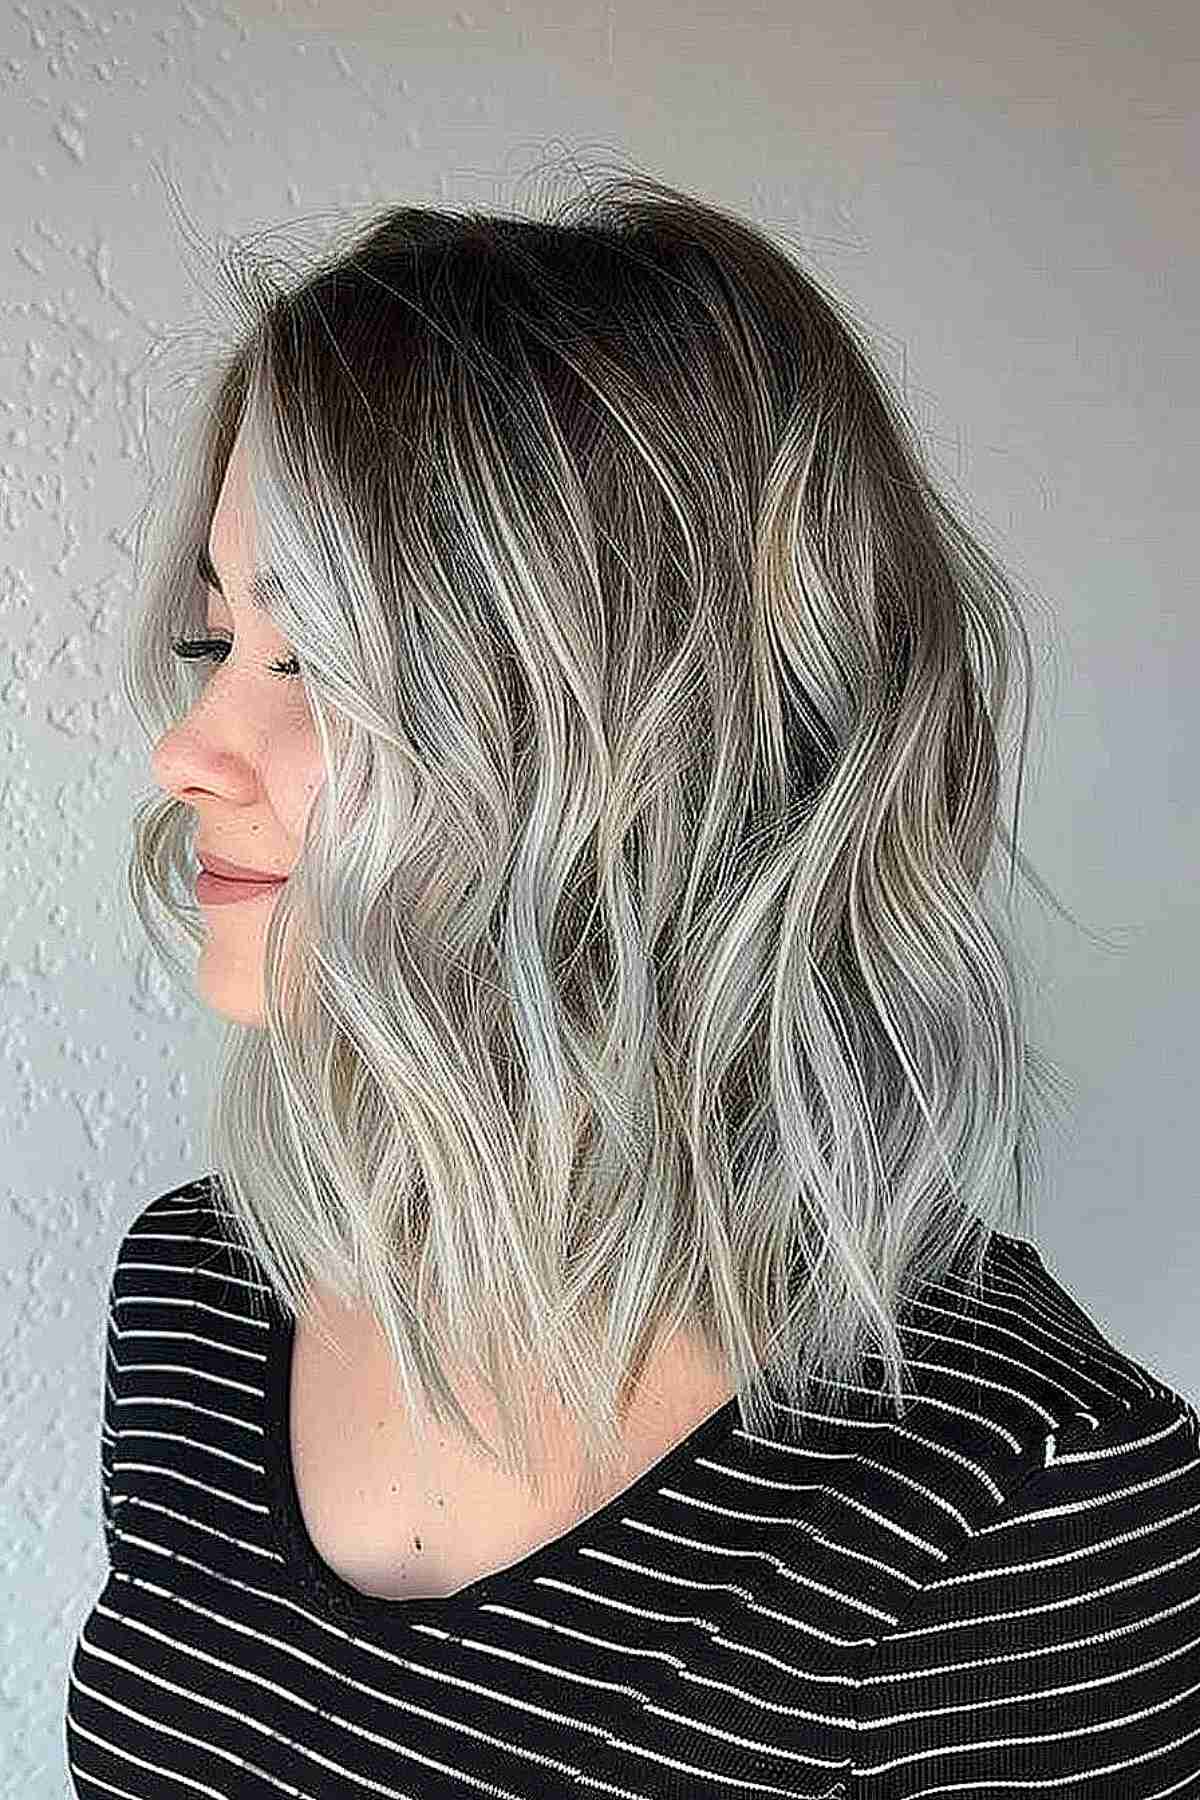 Medium-length wavy hair with a natural-looking silver ombre transition